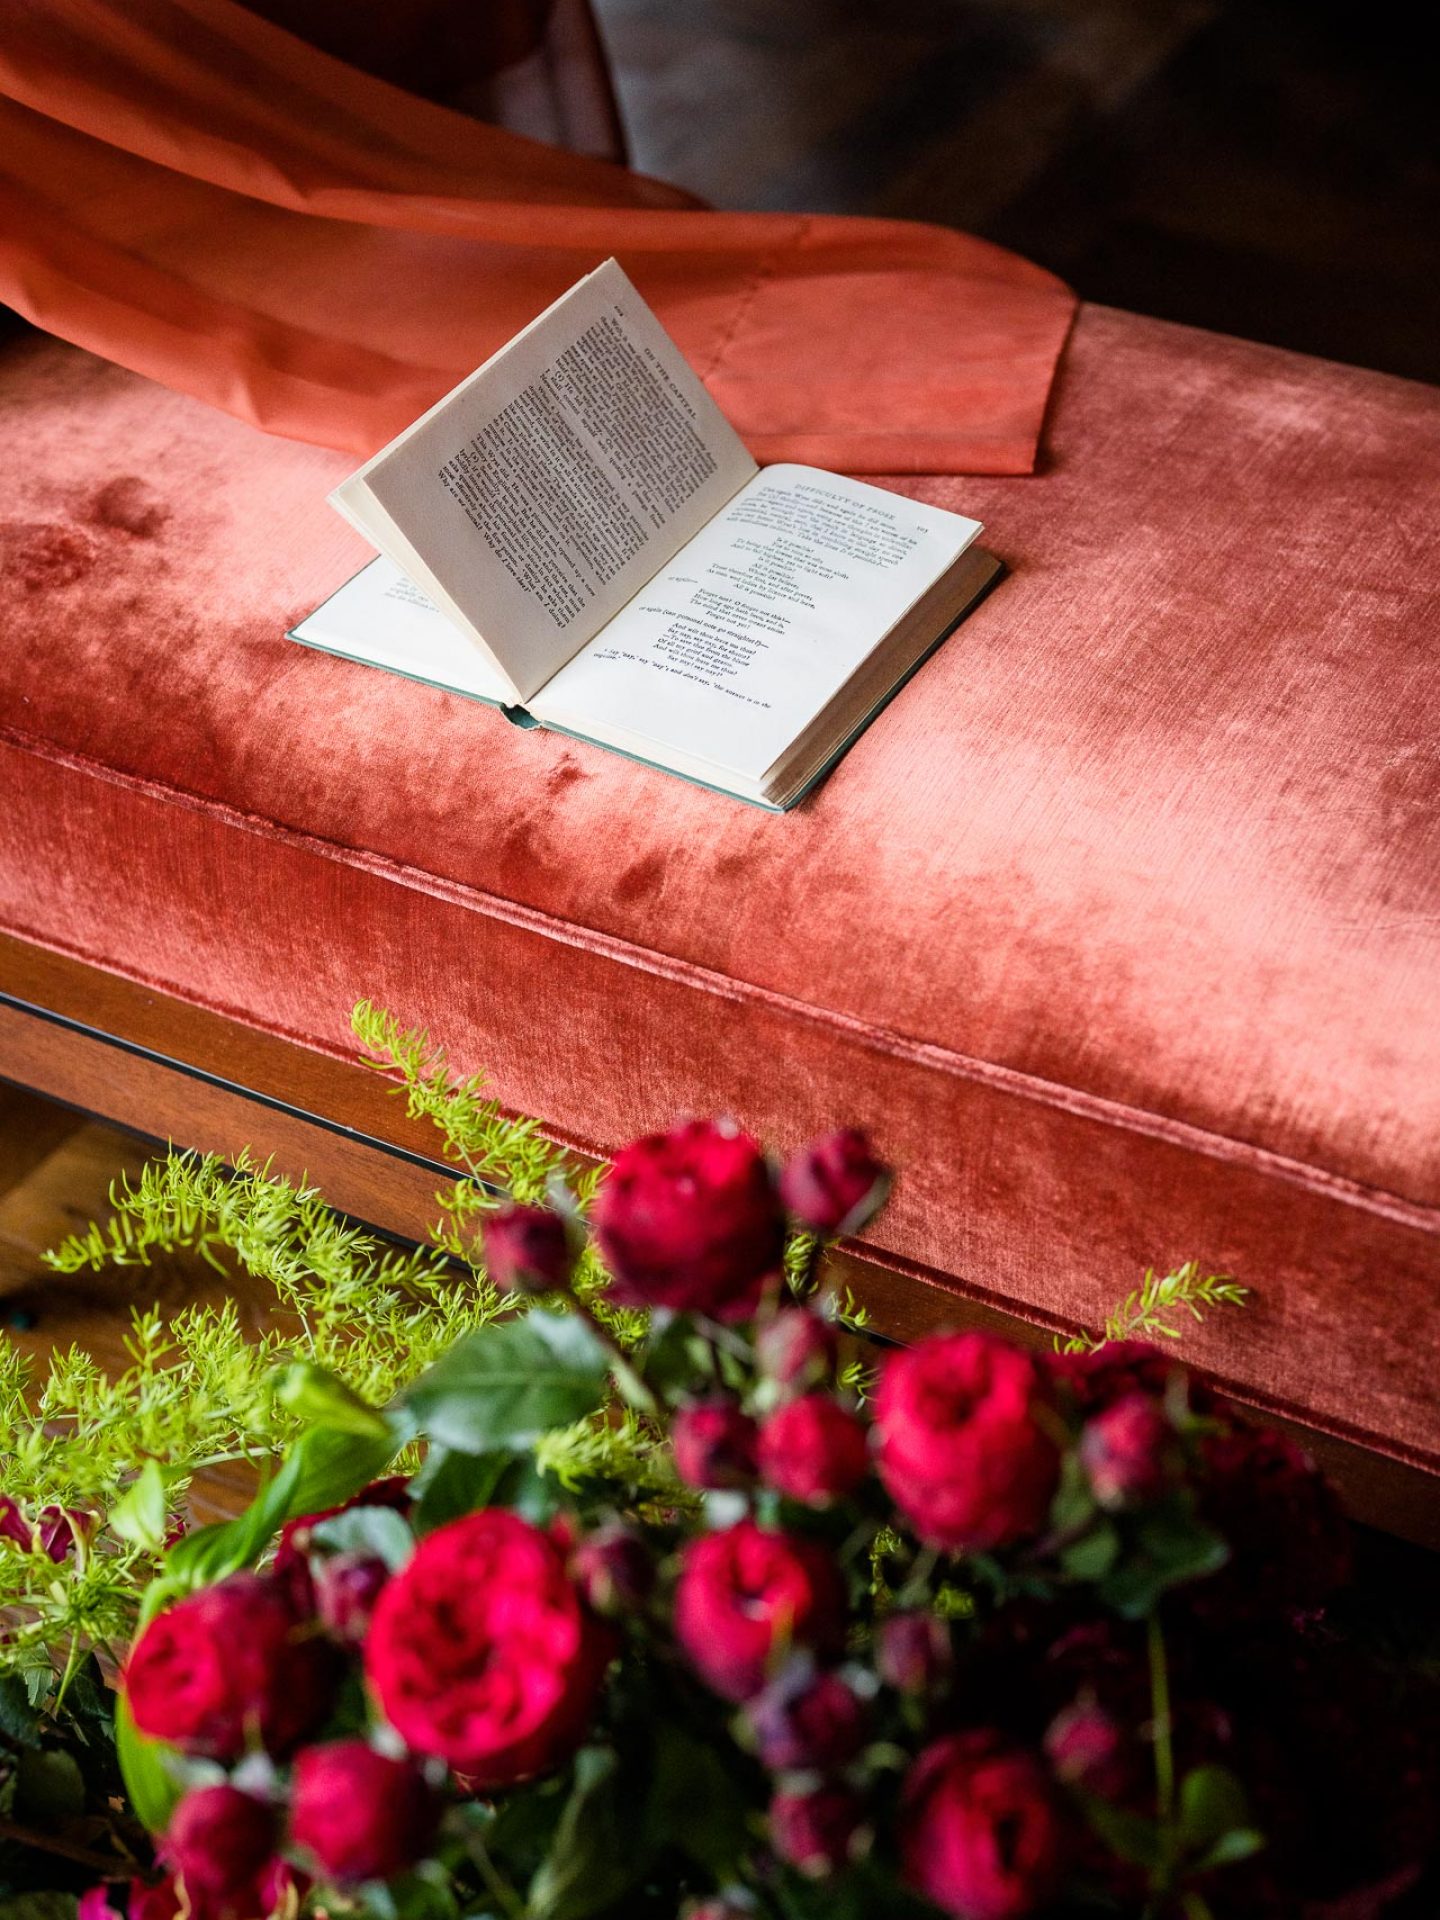 Villa Astor - Book and flowers photography